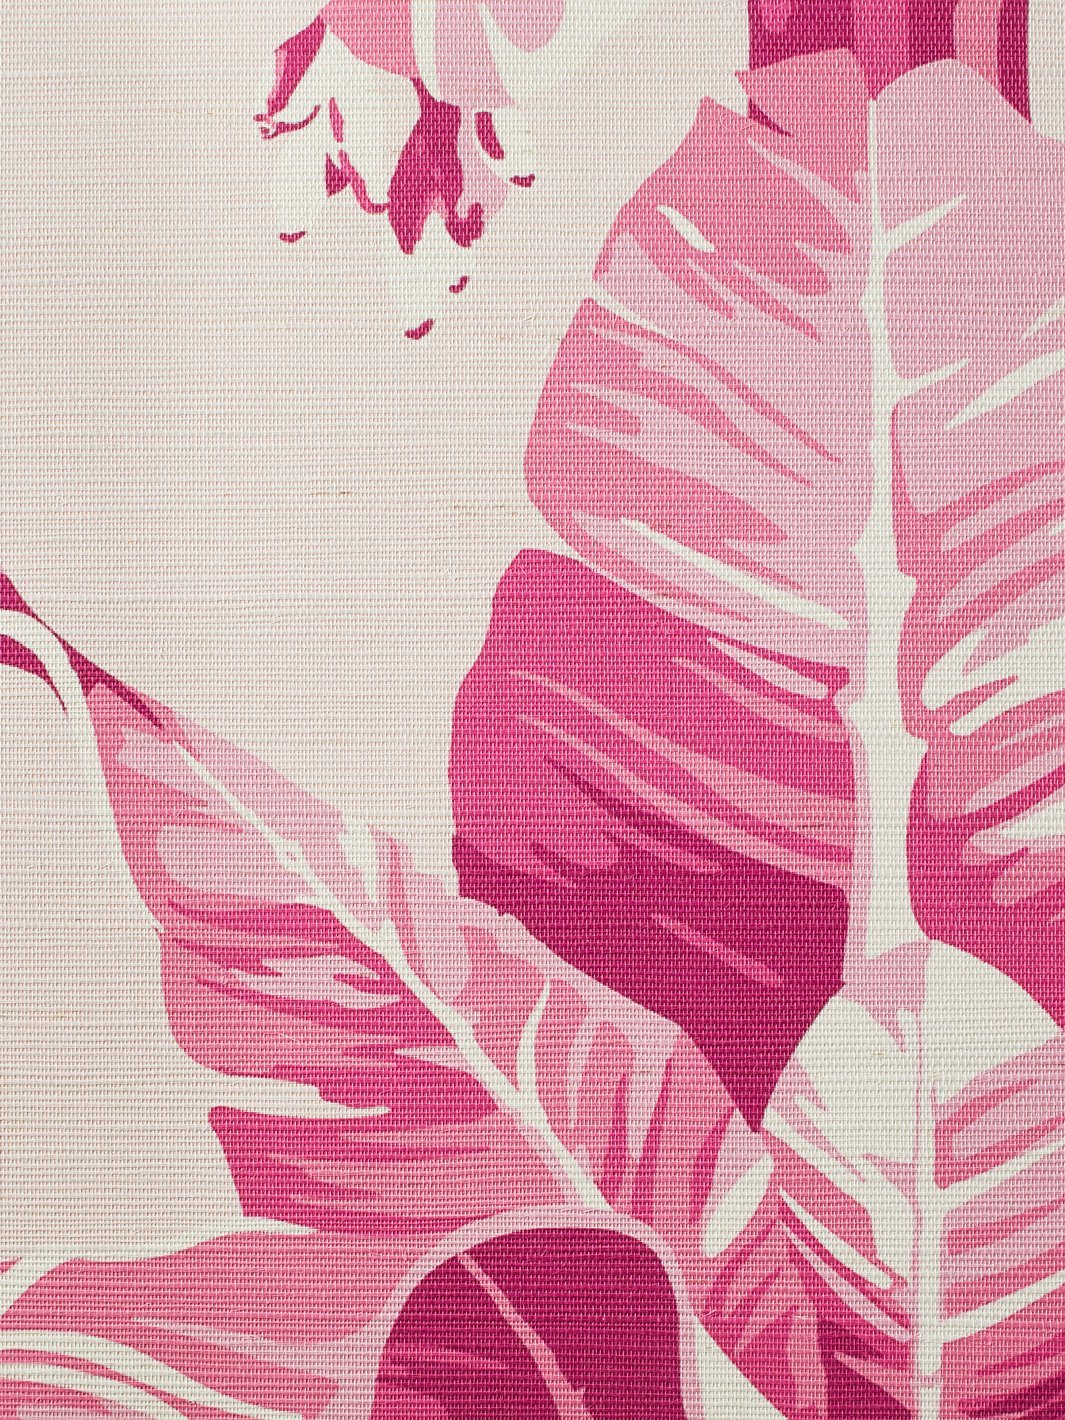 'Pacifico Palm' Grasscloth' Wallpaper by Nathan Turner - Electric Pink